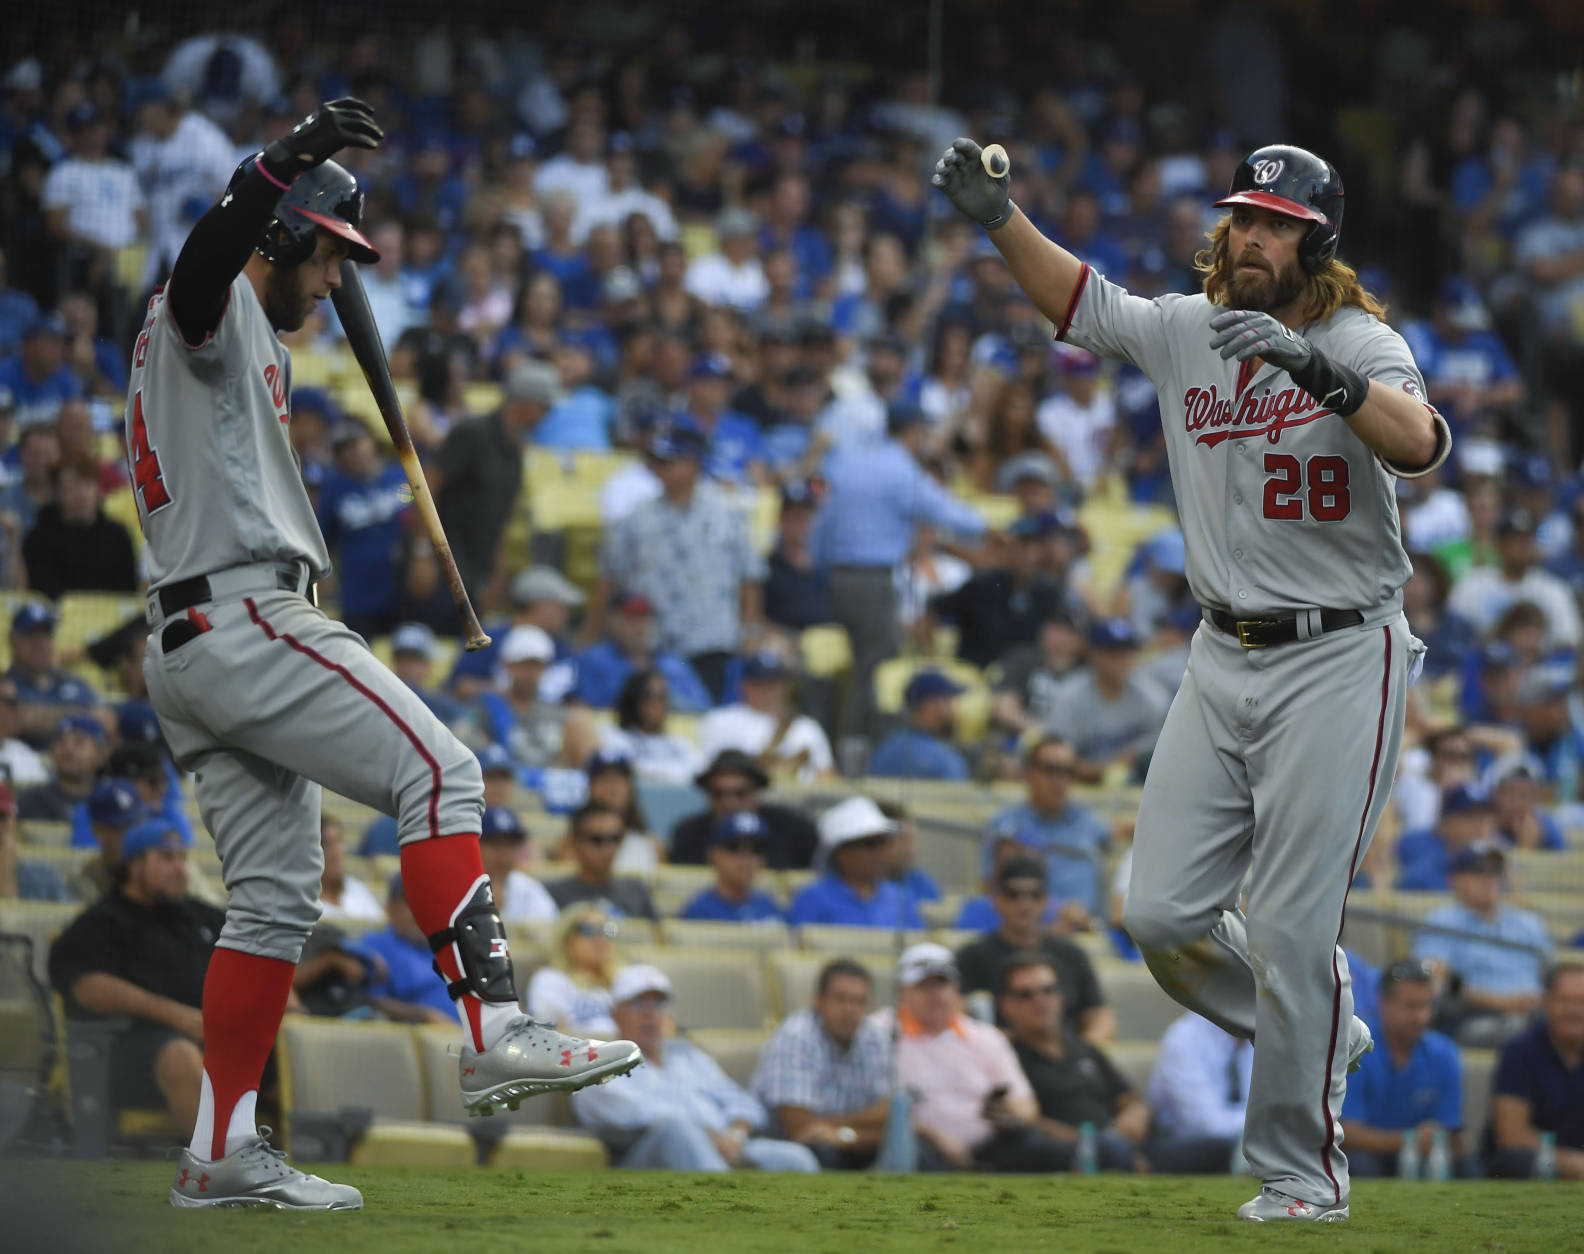 Washington Nationals' Jayson Werth, left, celebrates after his home run with Bryce Harper during the ninth inning in Game 3 of baseball's National League Division Series in Los Angeles, Monday, Oct. 10, 2016. (AP Photo/Mark J. Terrill)